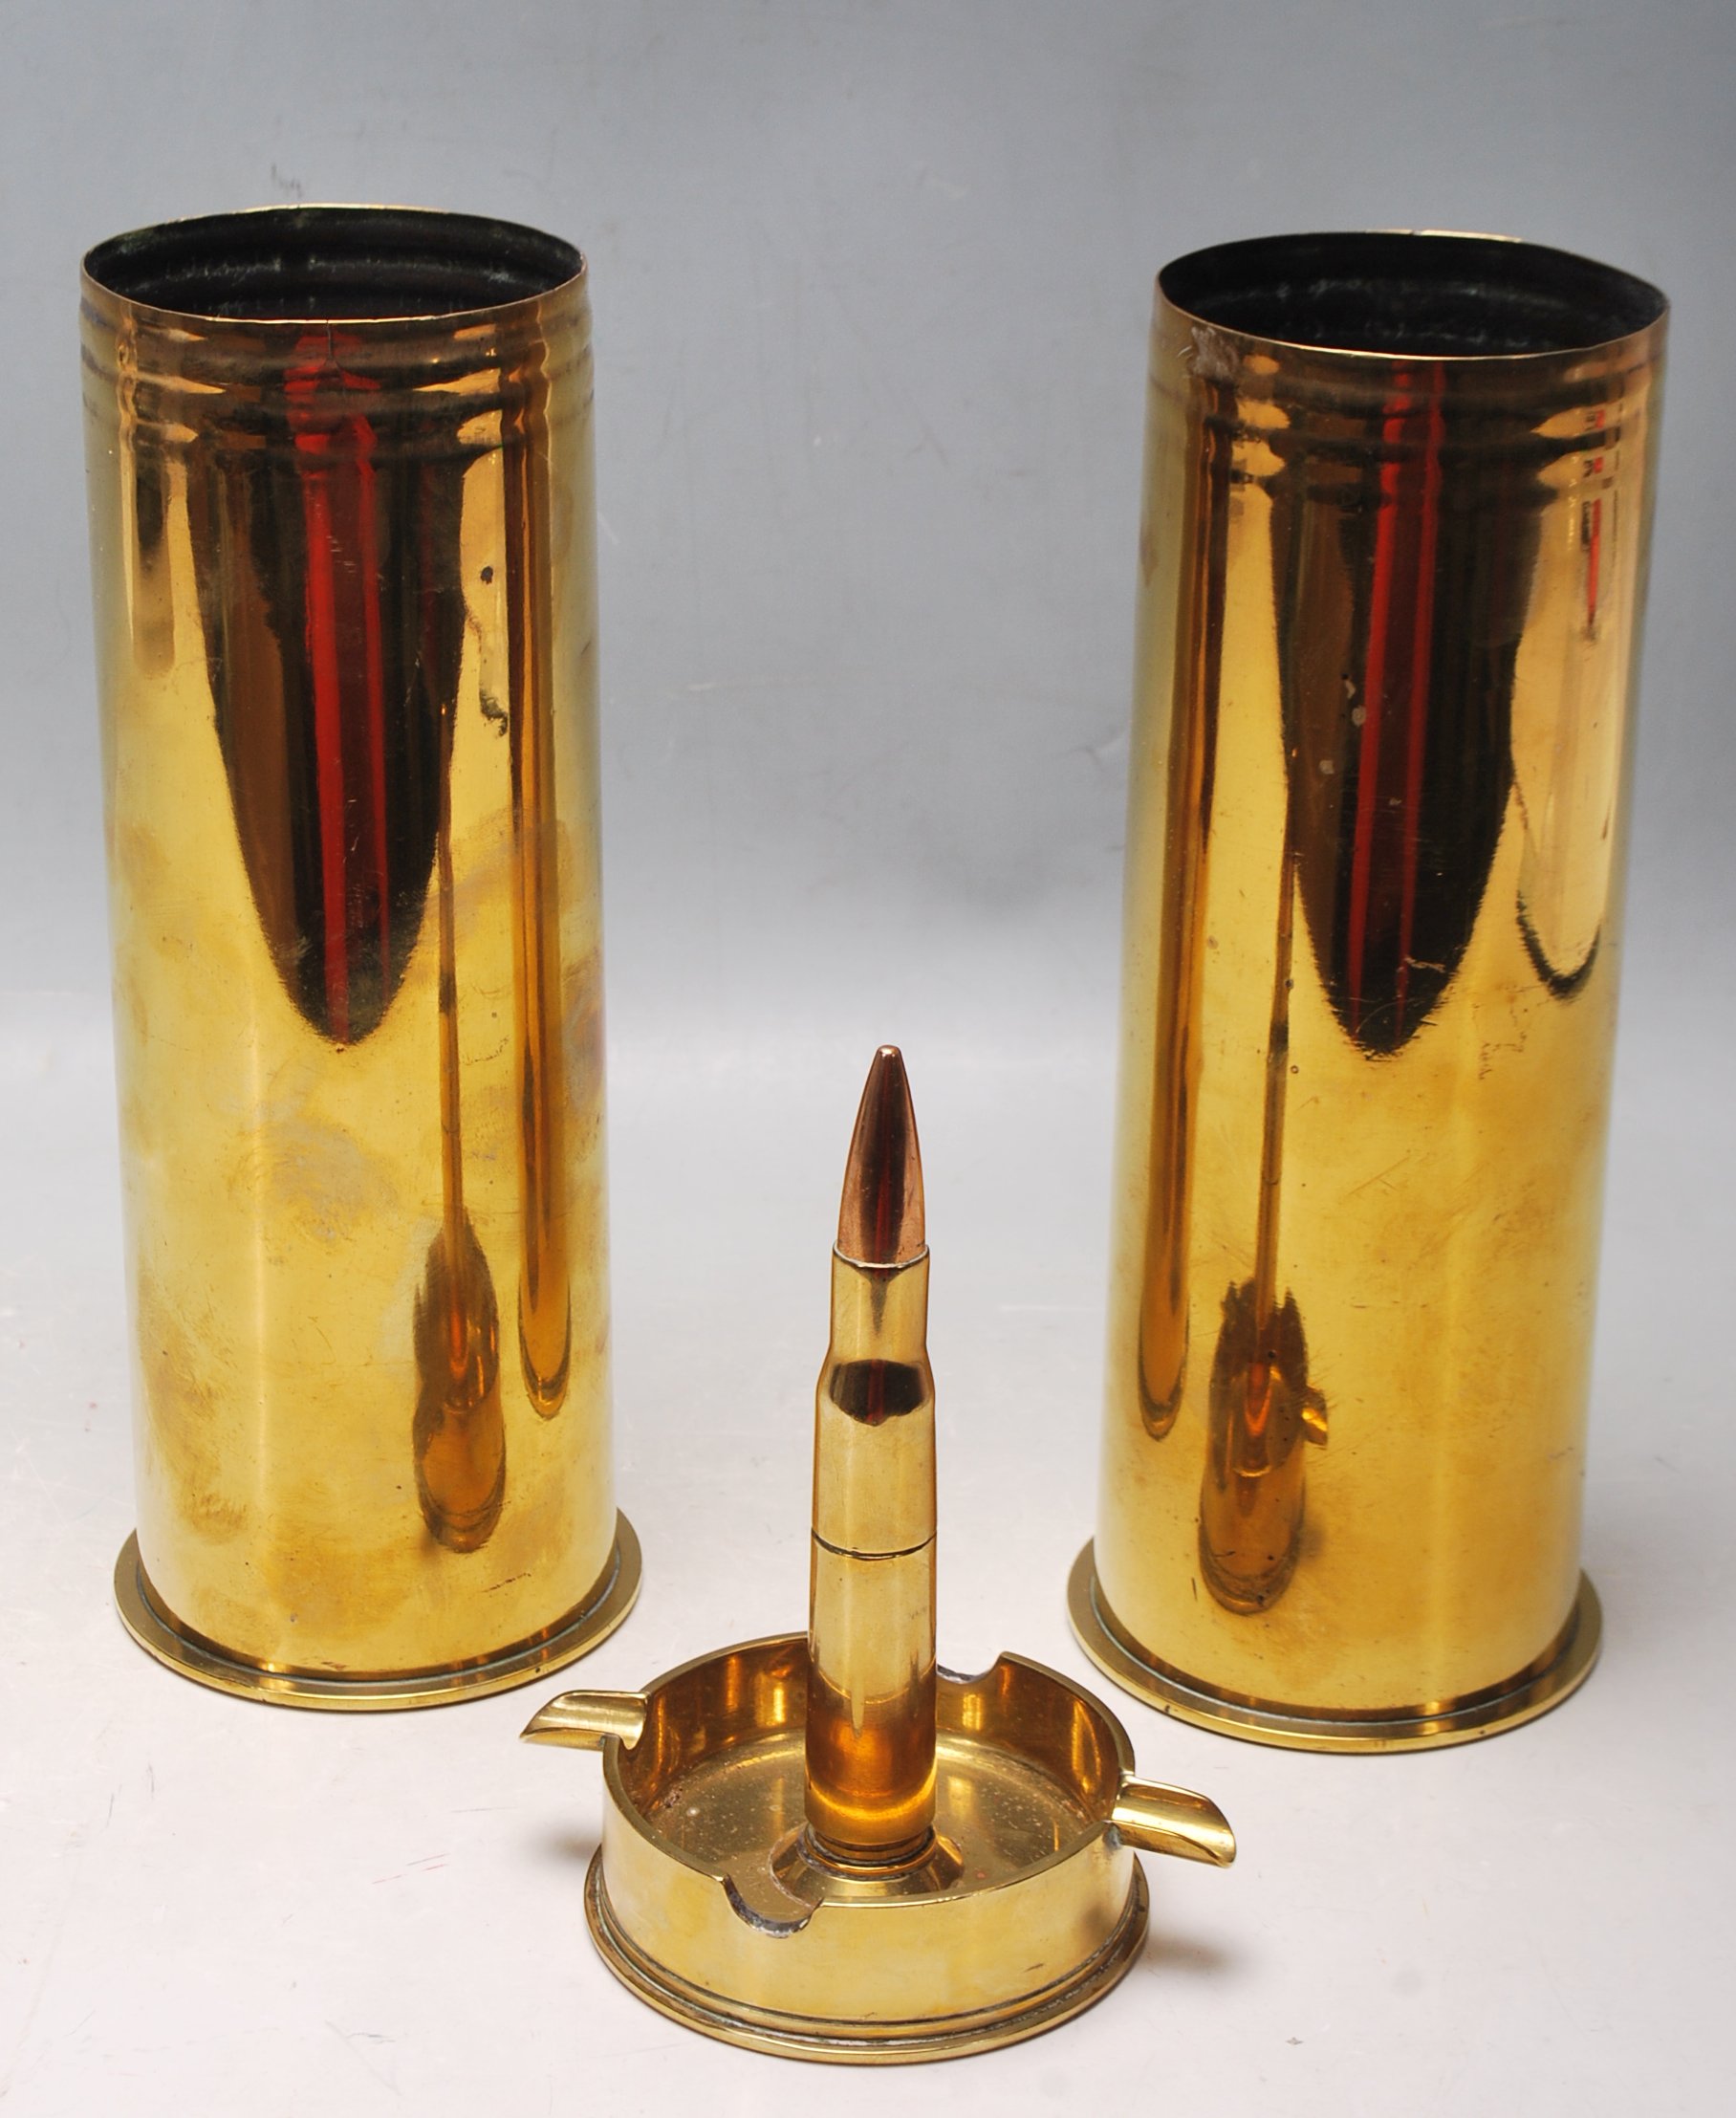 WWII SECON WAR BRASS TRENCH ART ASHTRAY AND LIGHTER